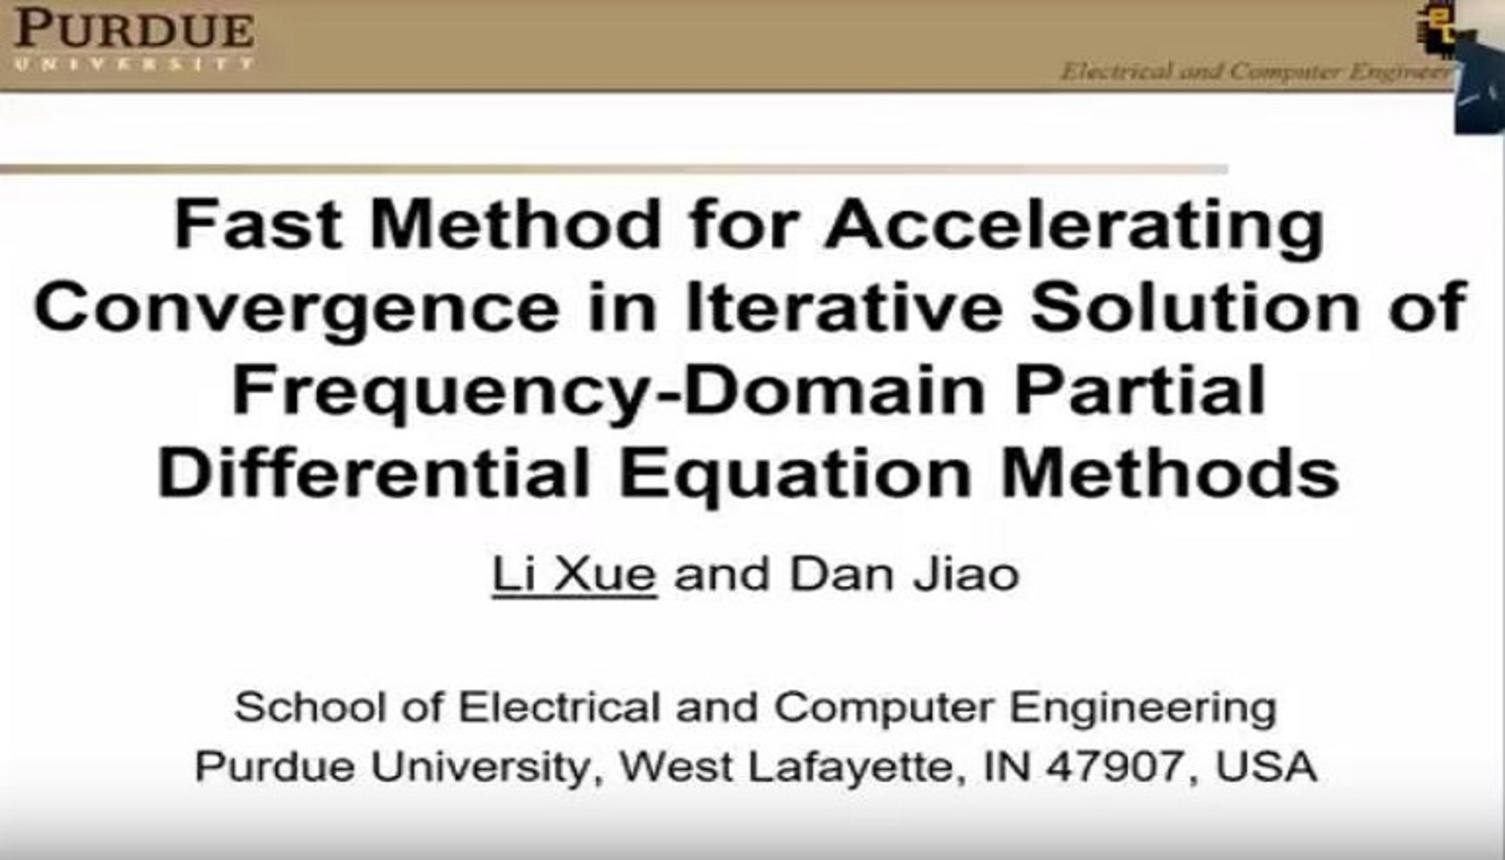 Fast Method for Accelerating Convergence in Iterative Solution of Frequency-Domain Partial Differential Equation Methods Video